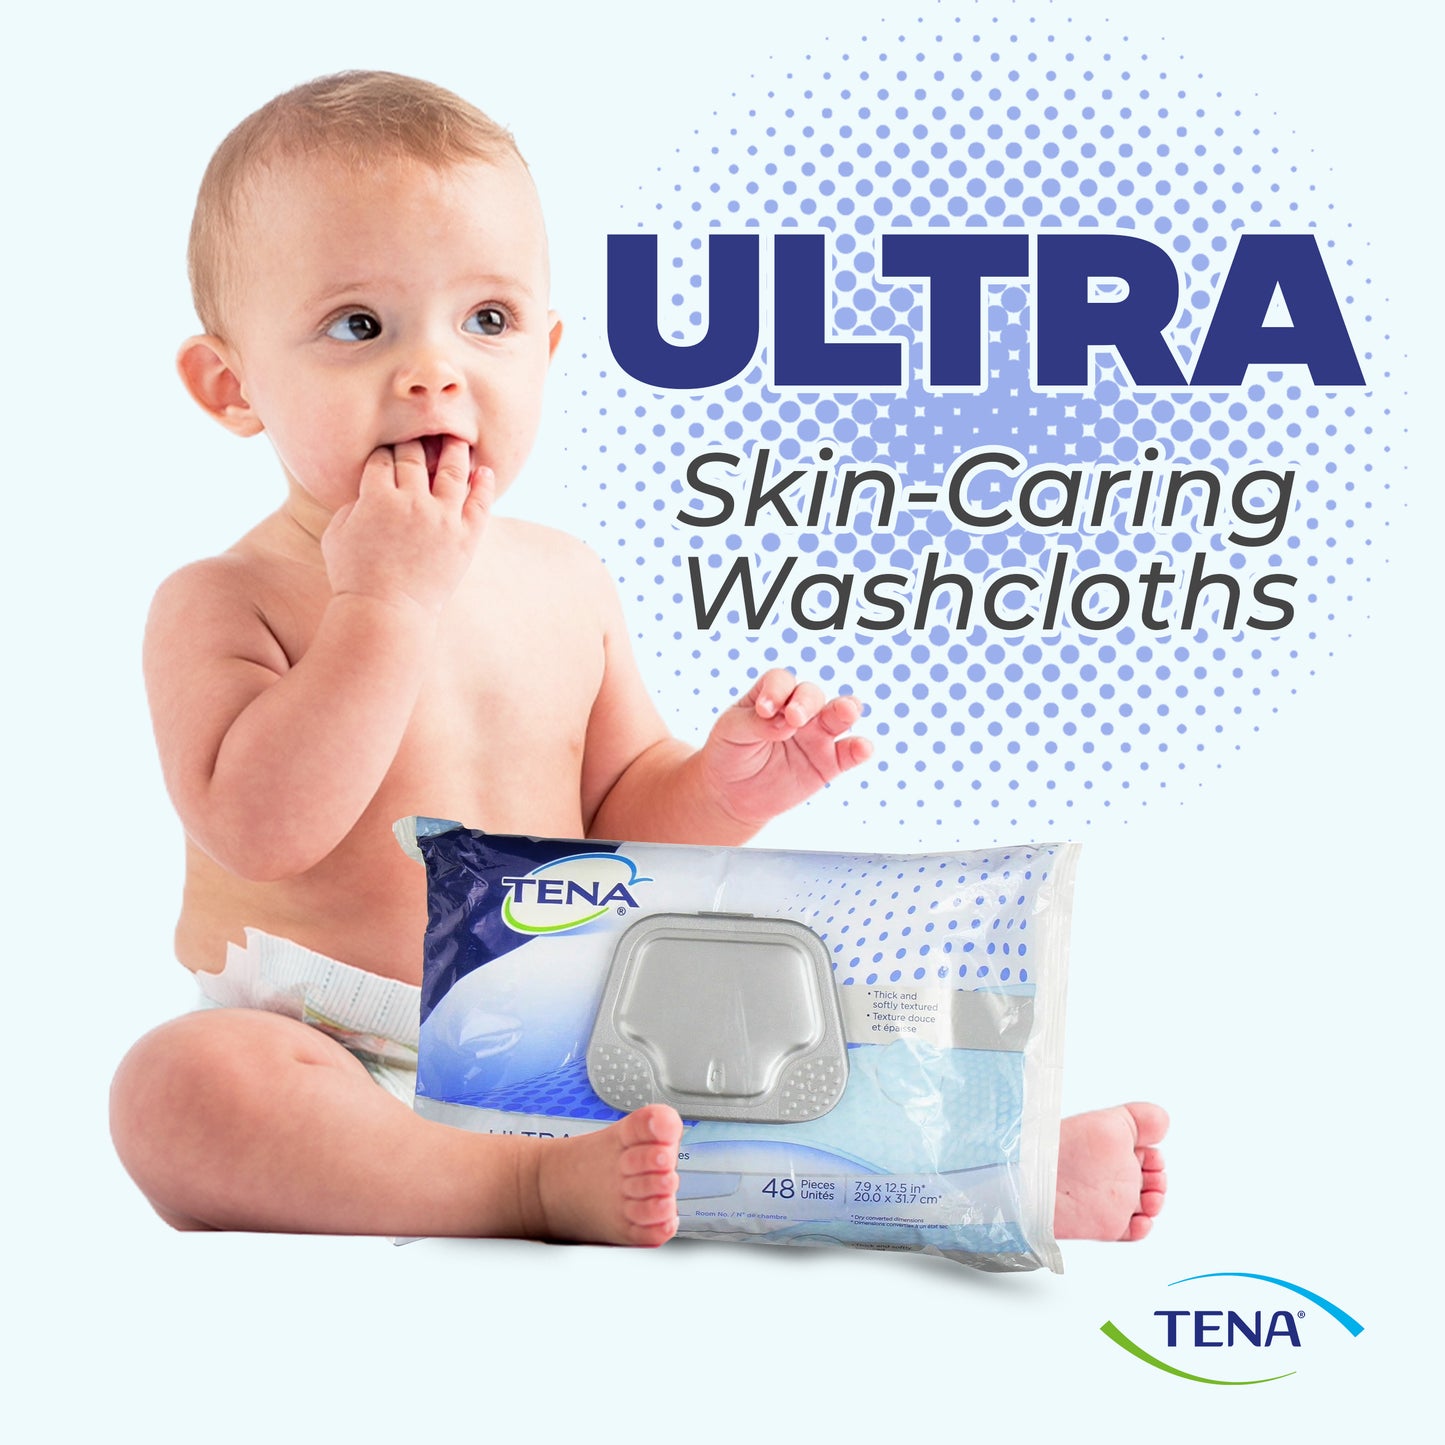 TENA Ultra Washcloths 8" x 12-1/2" Mildly Scented, Alcohol-Free